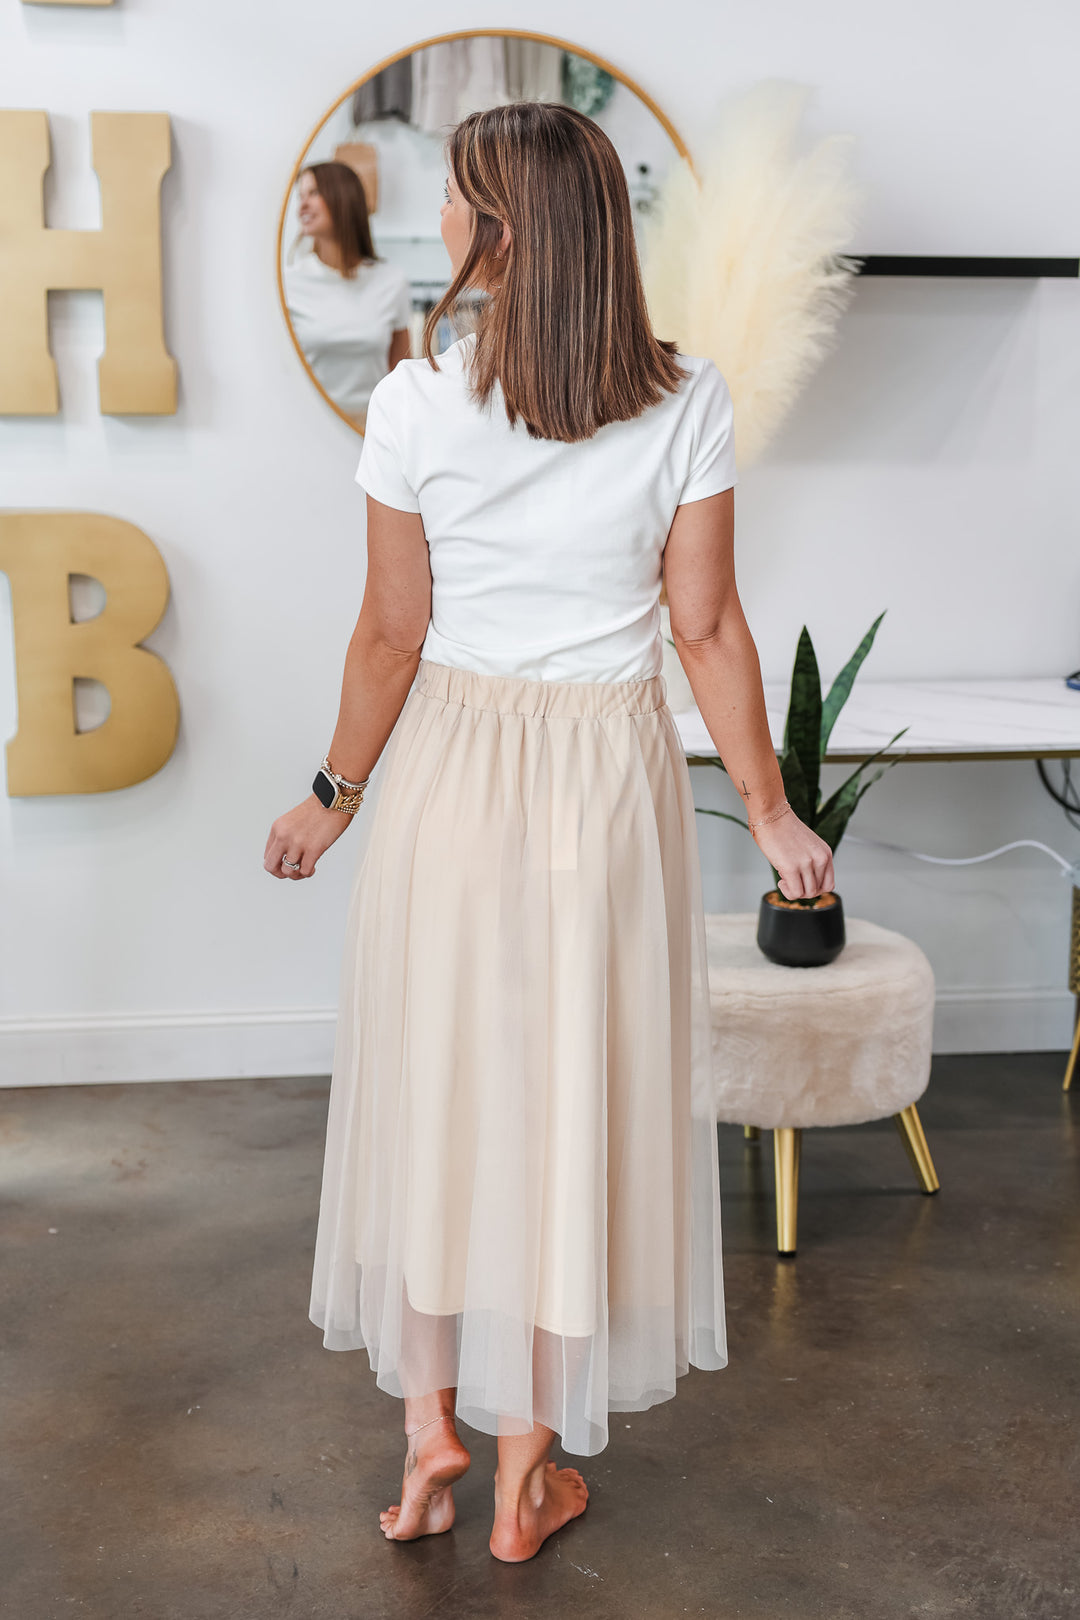 A brunette woman standing in a shop wearing a champagne colored tulle skirt with a basic white tee. She is rear facing.